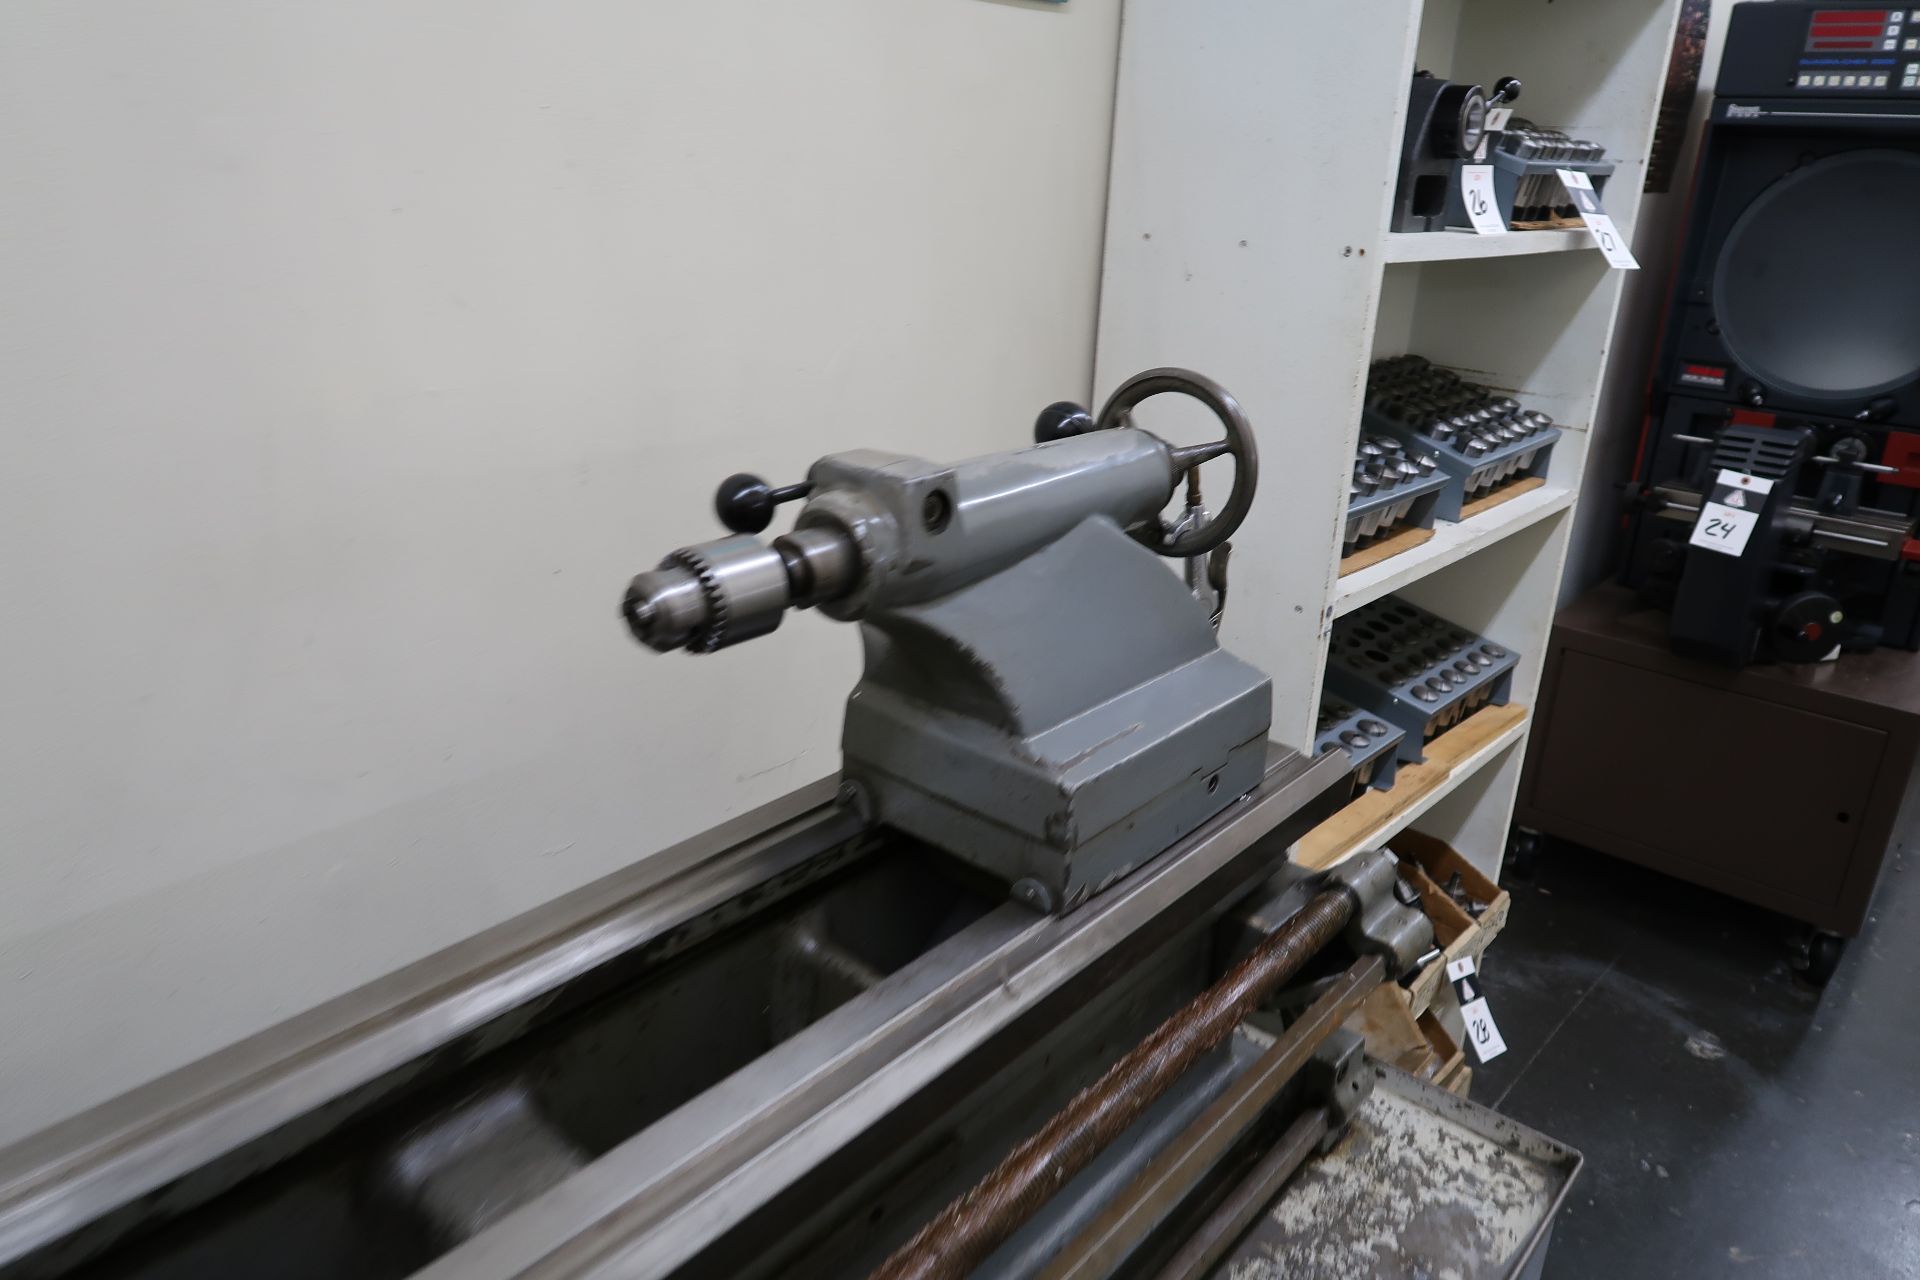 Rockwell “Delta 14” 14” x 45” Lathe s/n 1403561 w 40-1600 Adjustable RPM, (SOLD AS IS) - Image 5 of 9